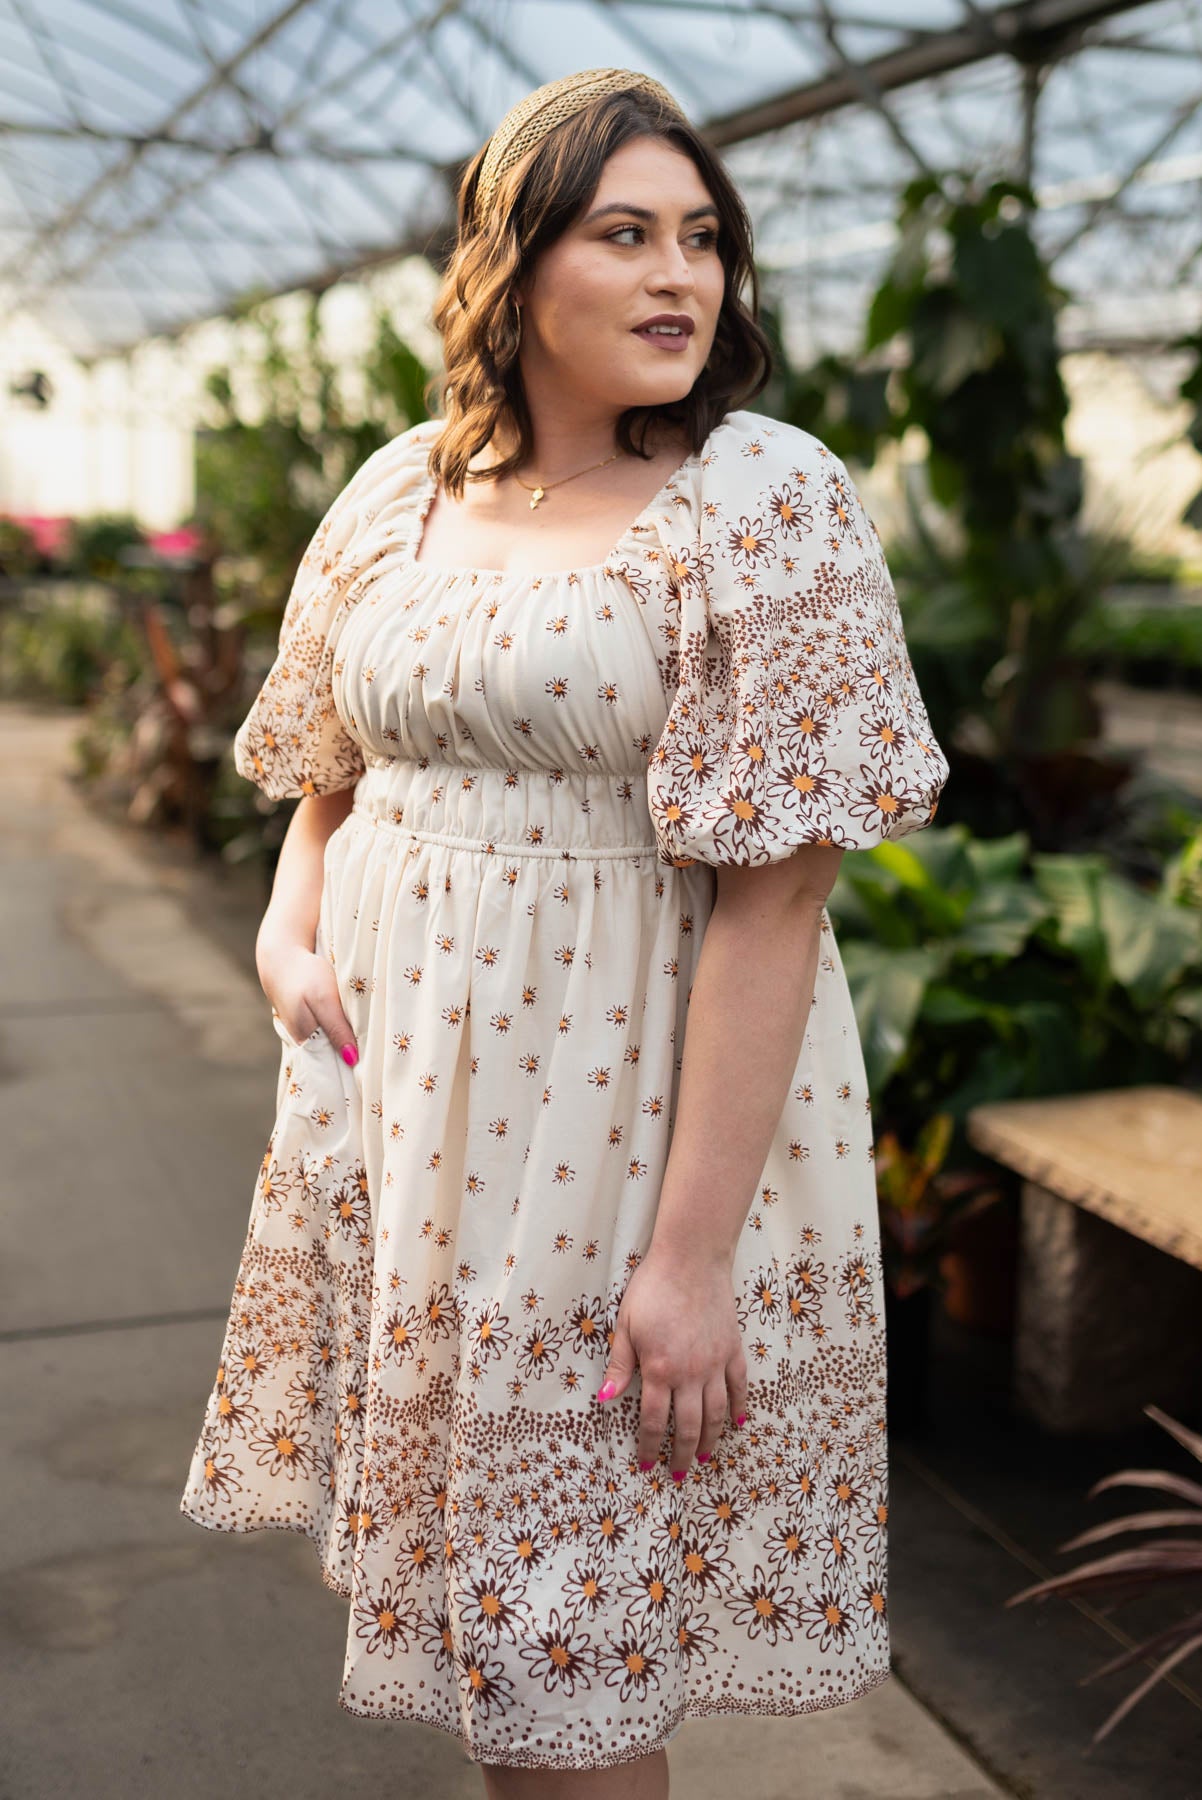 Plus size beige daisy dress with square neck